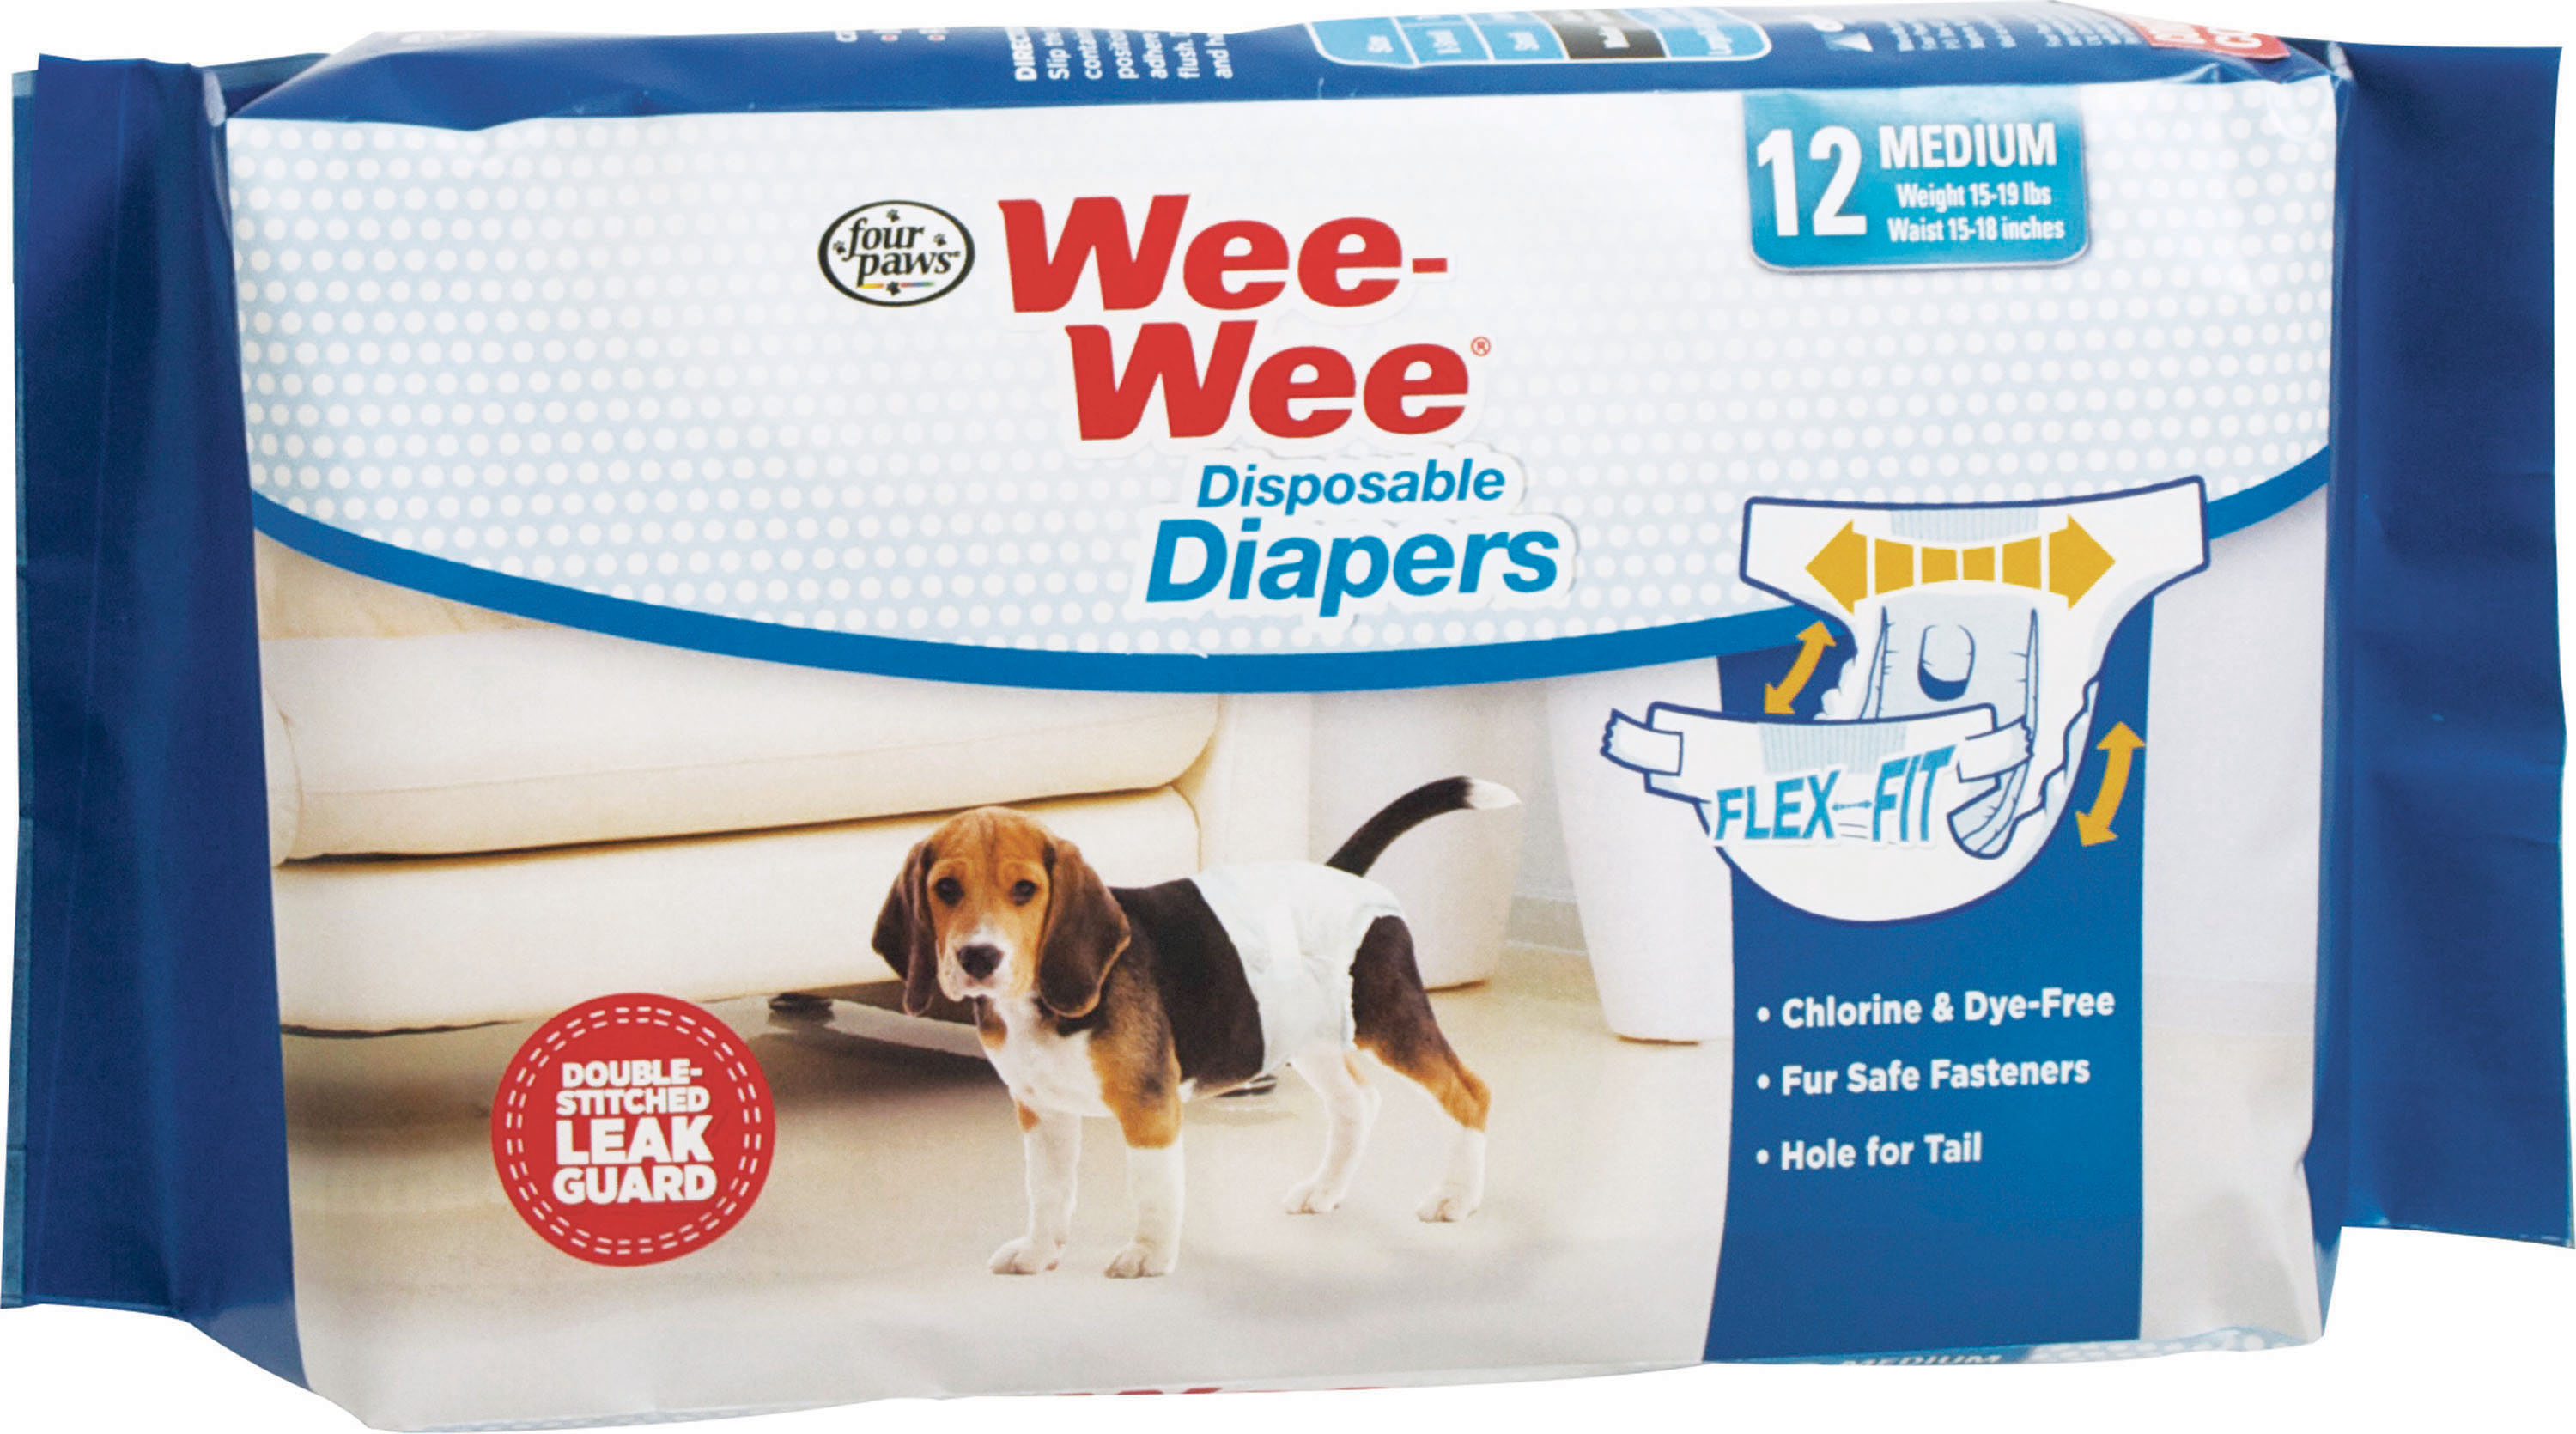 Wee-wee Disposable Diapers (Option 1: Medium)